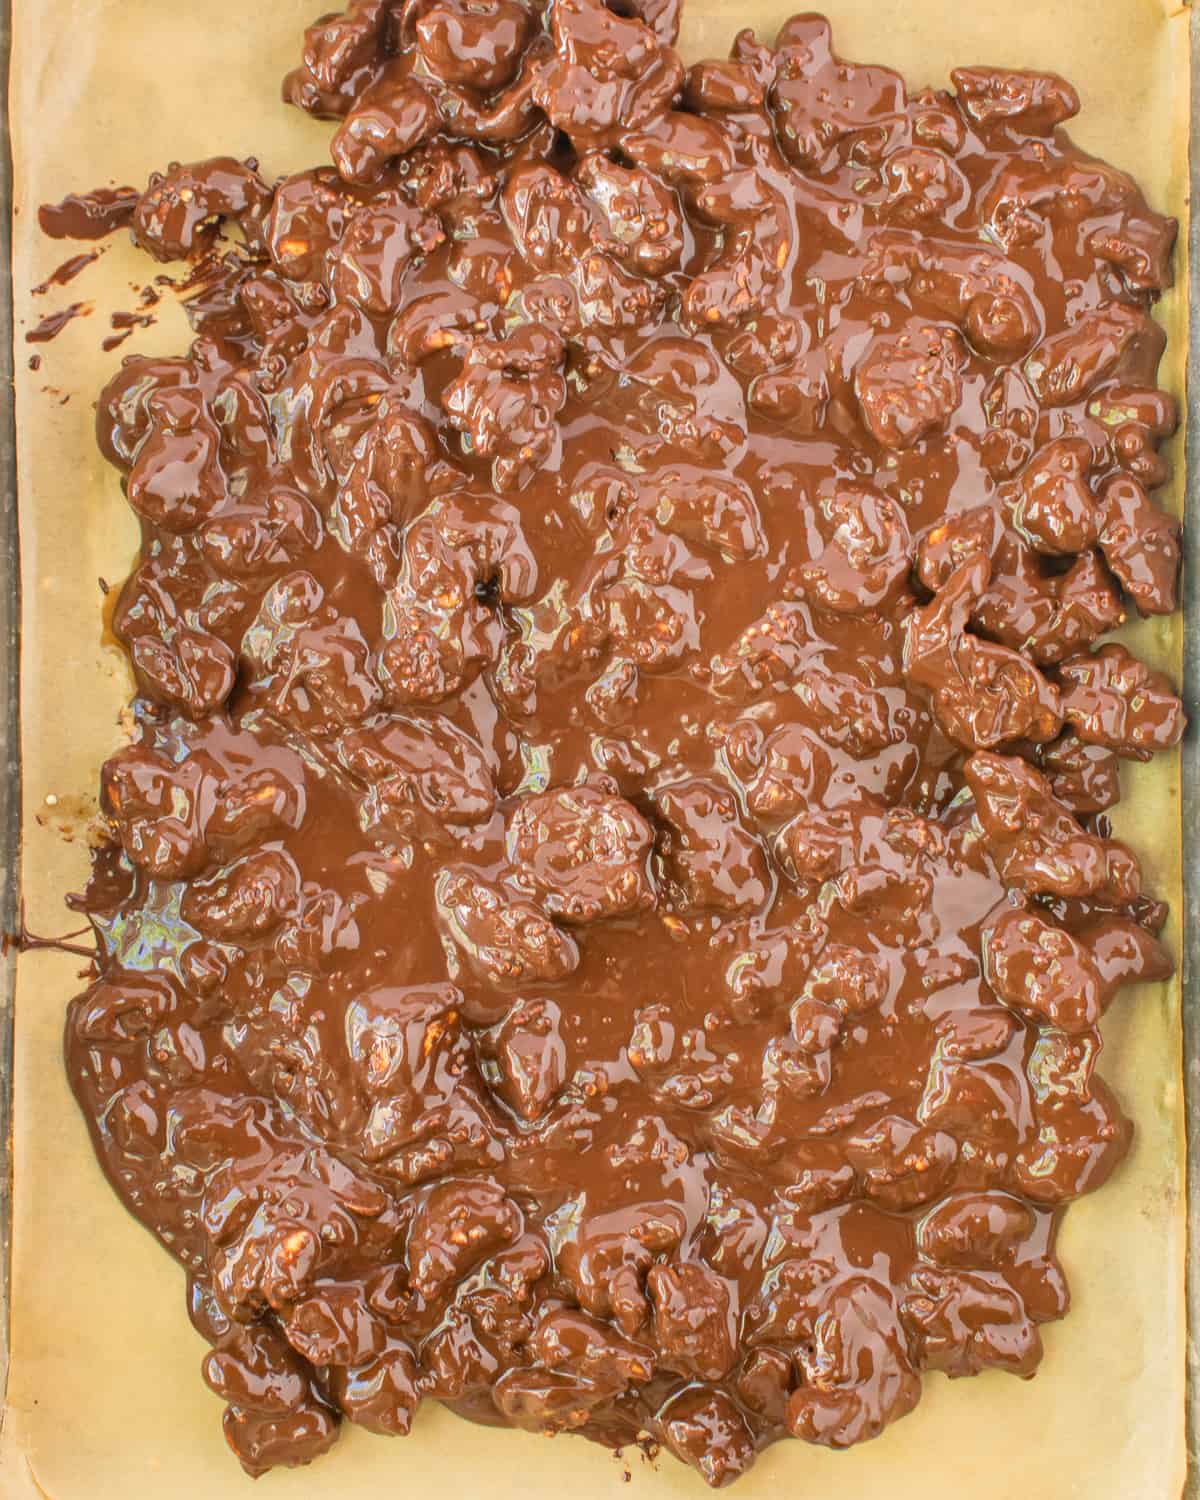 melted chocolate and nuts on baking sheet.